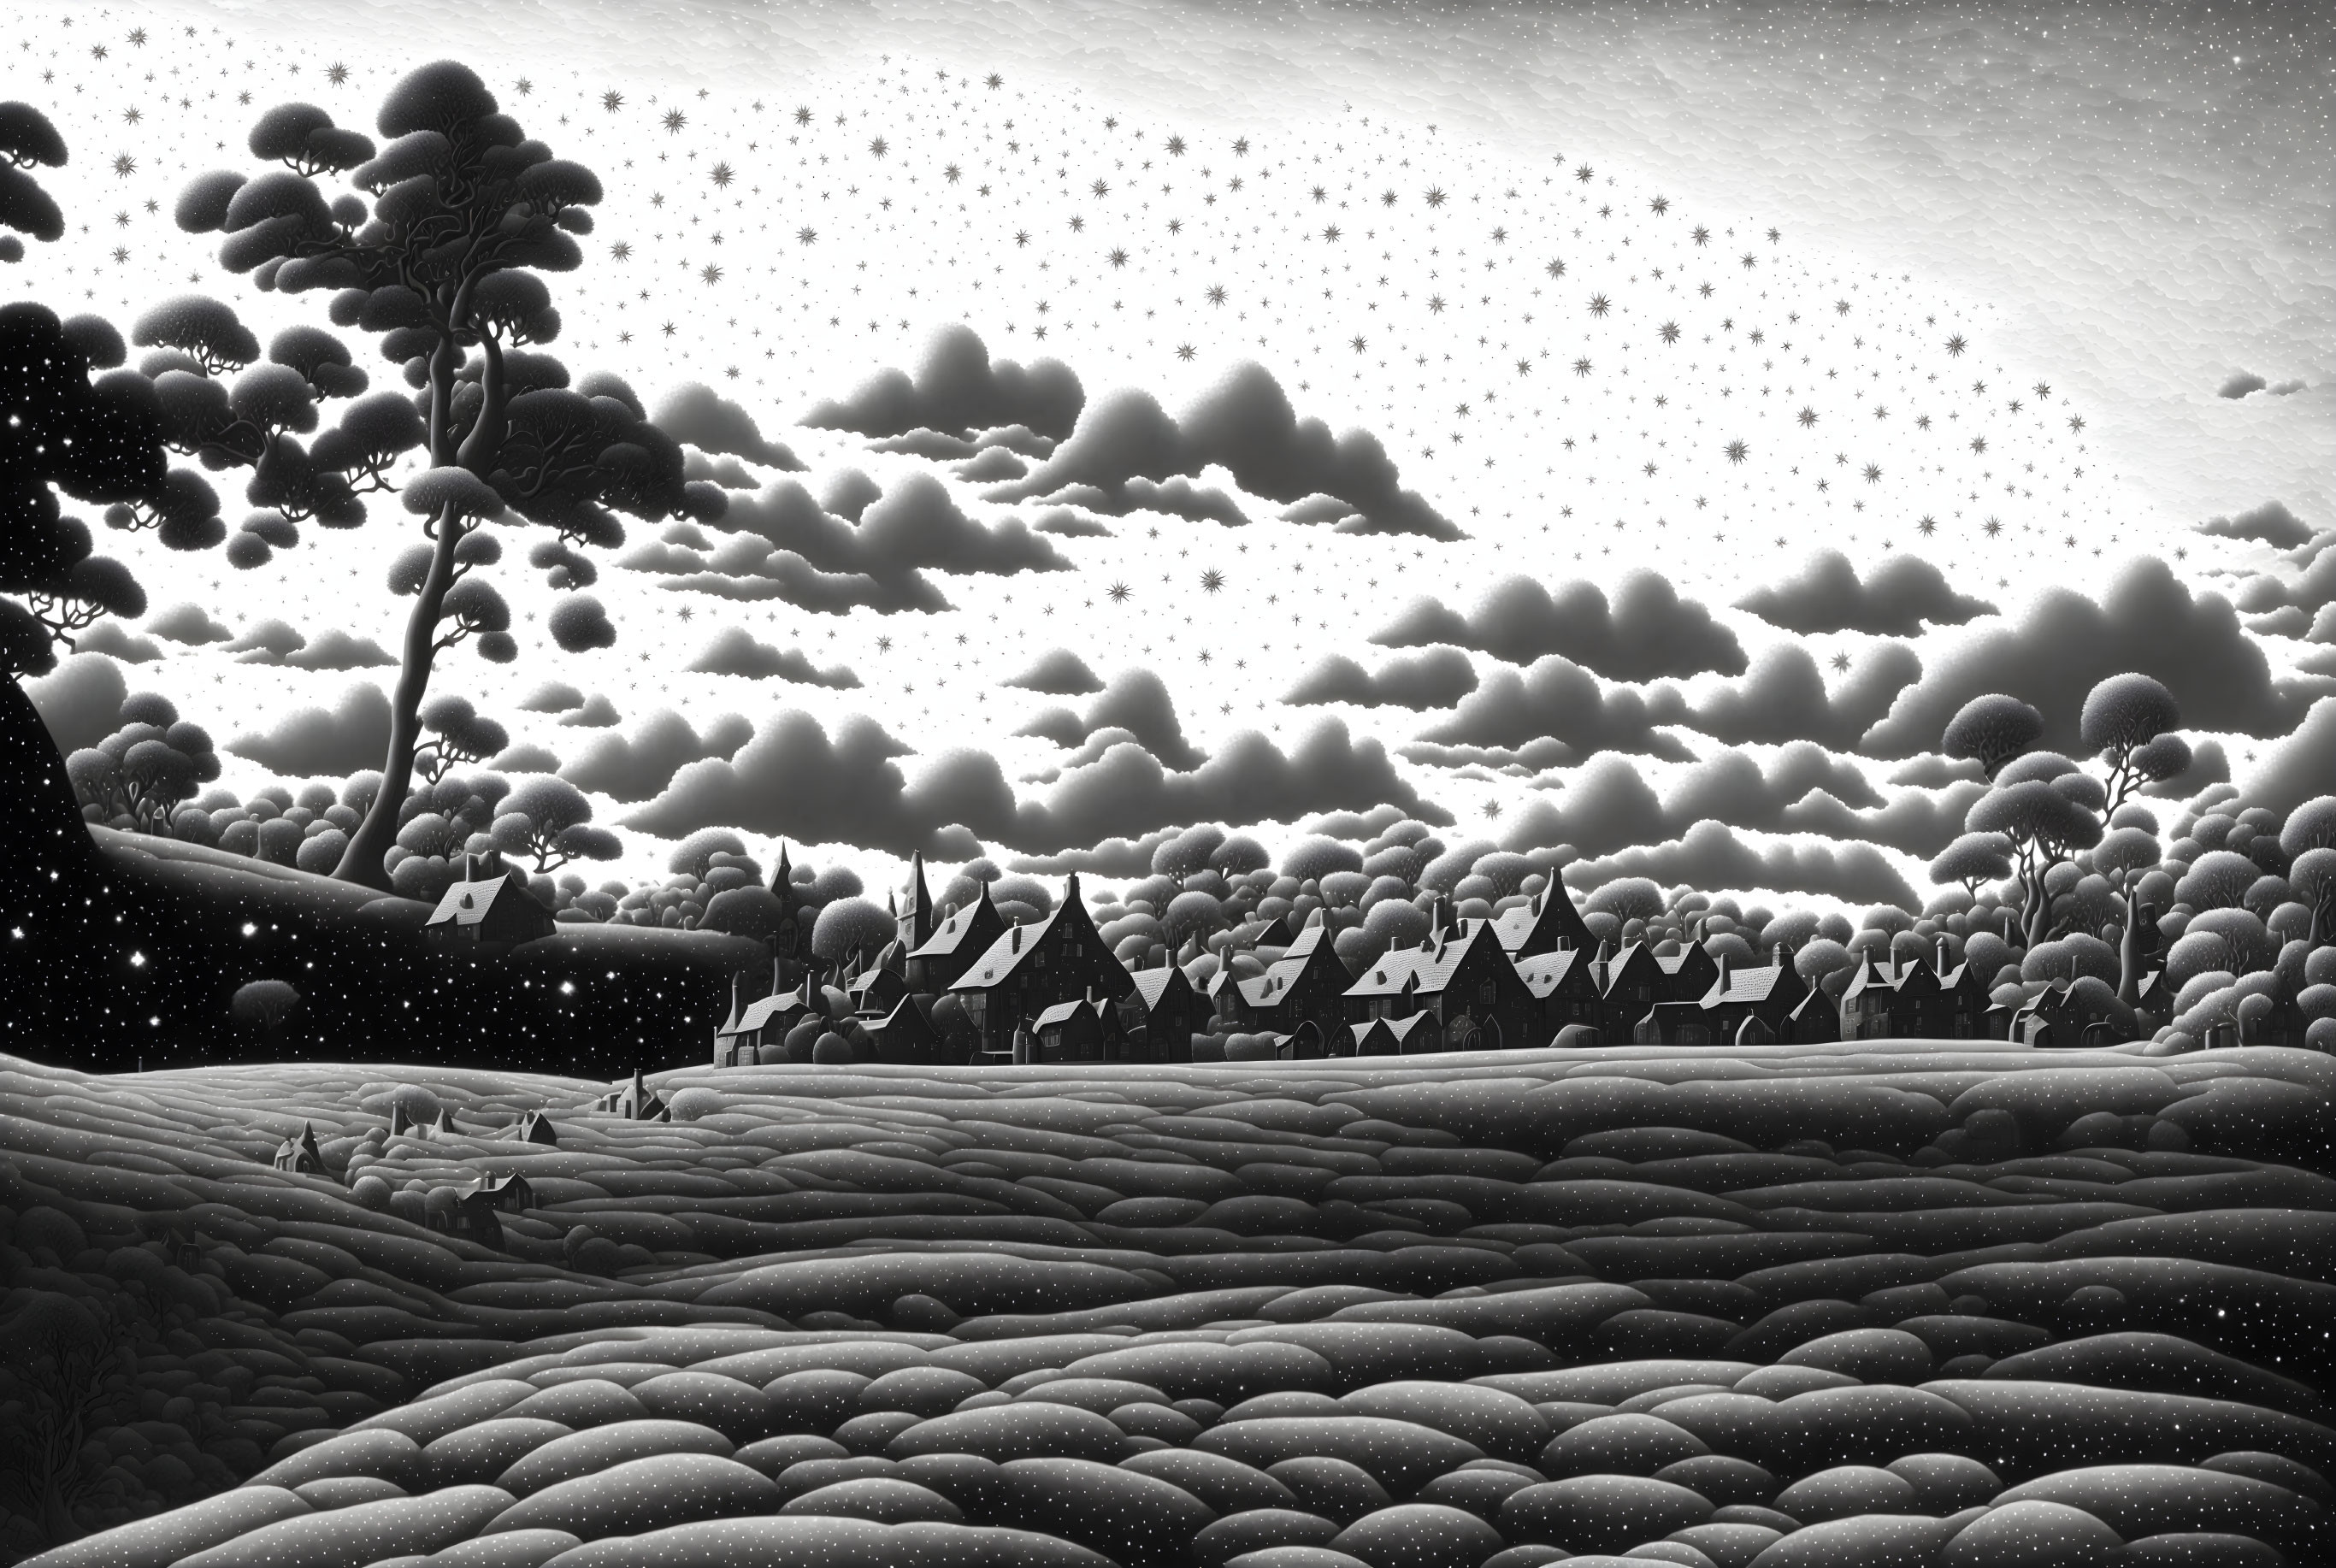 Monochromatic landscape with textured field, whimsical trees, village, clouds, and starry sky